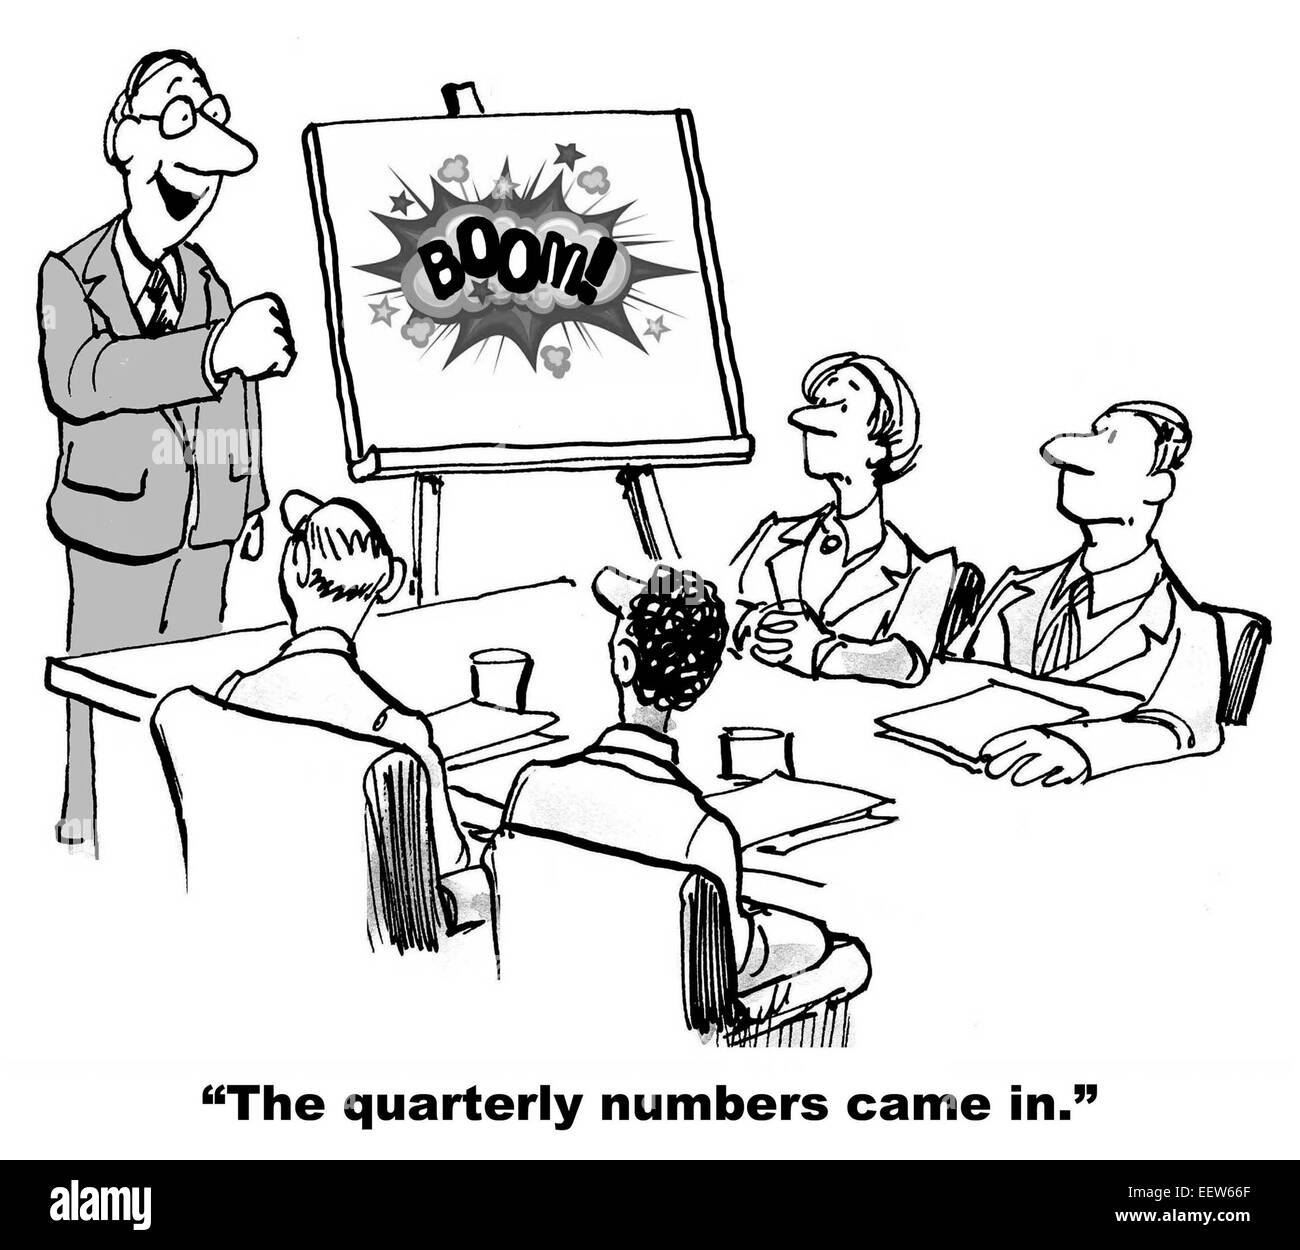 Cartoon of business leader telling team they exceeded the quarterly forecast, BOOM! Stock Photo